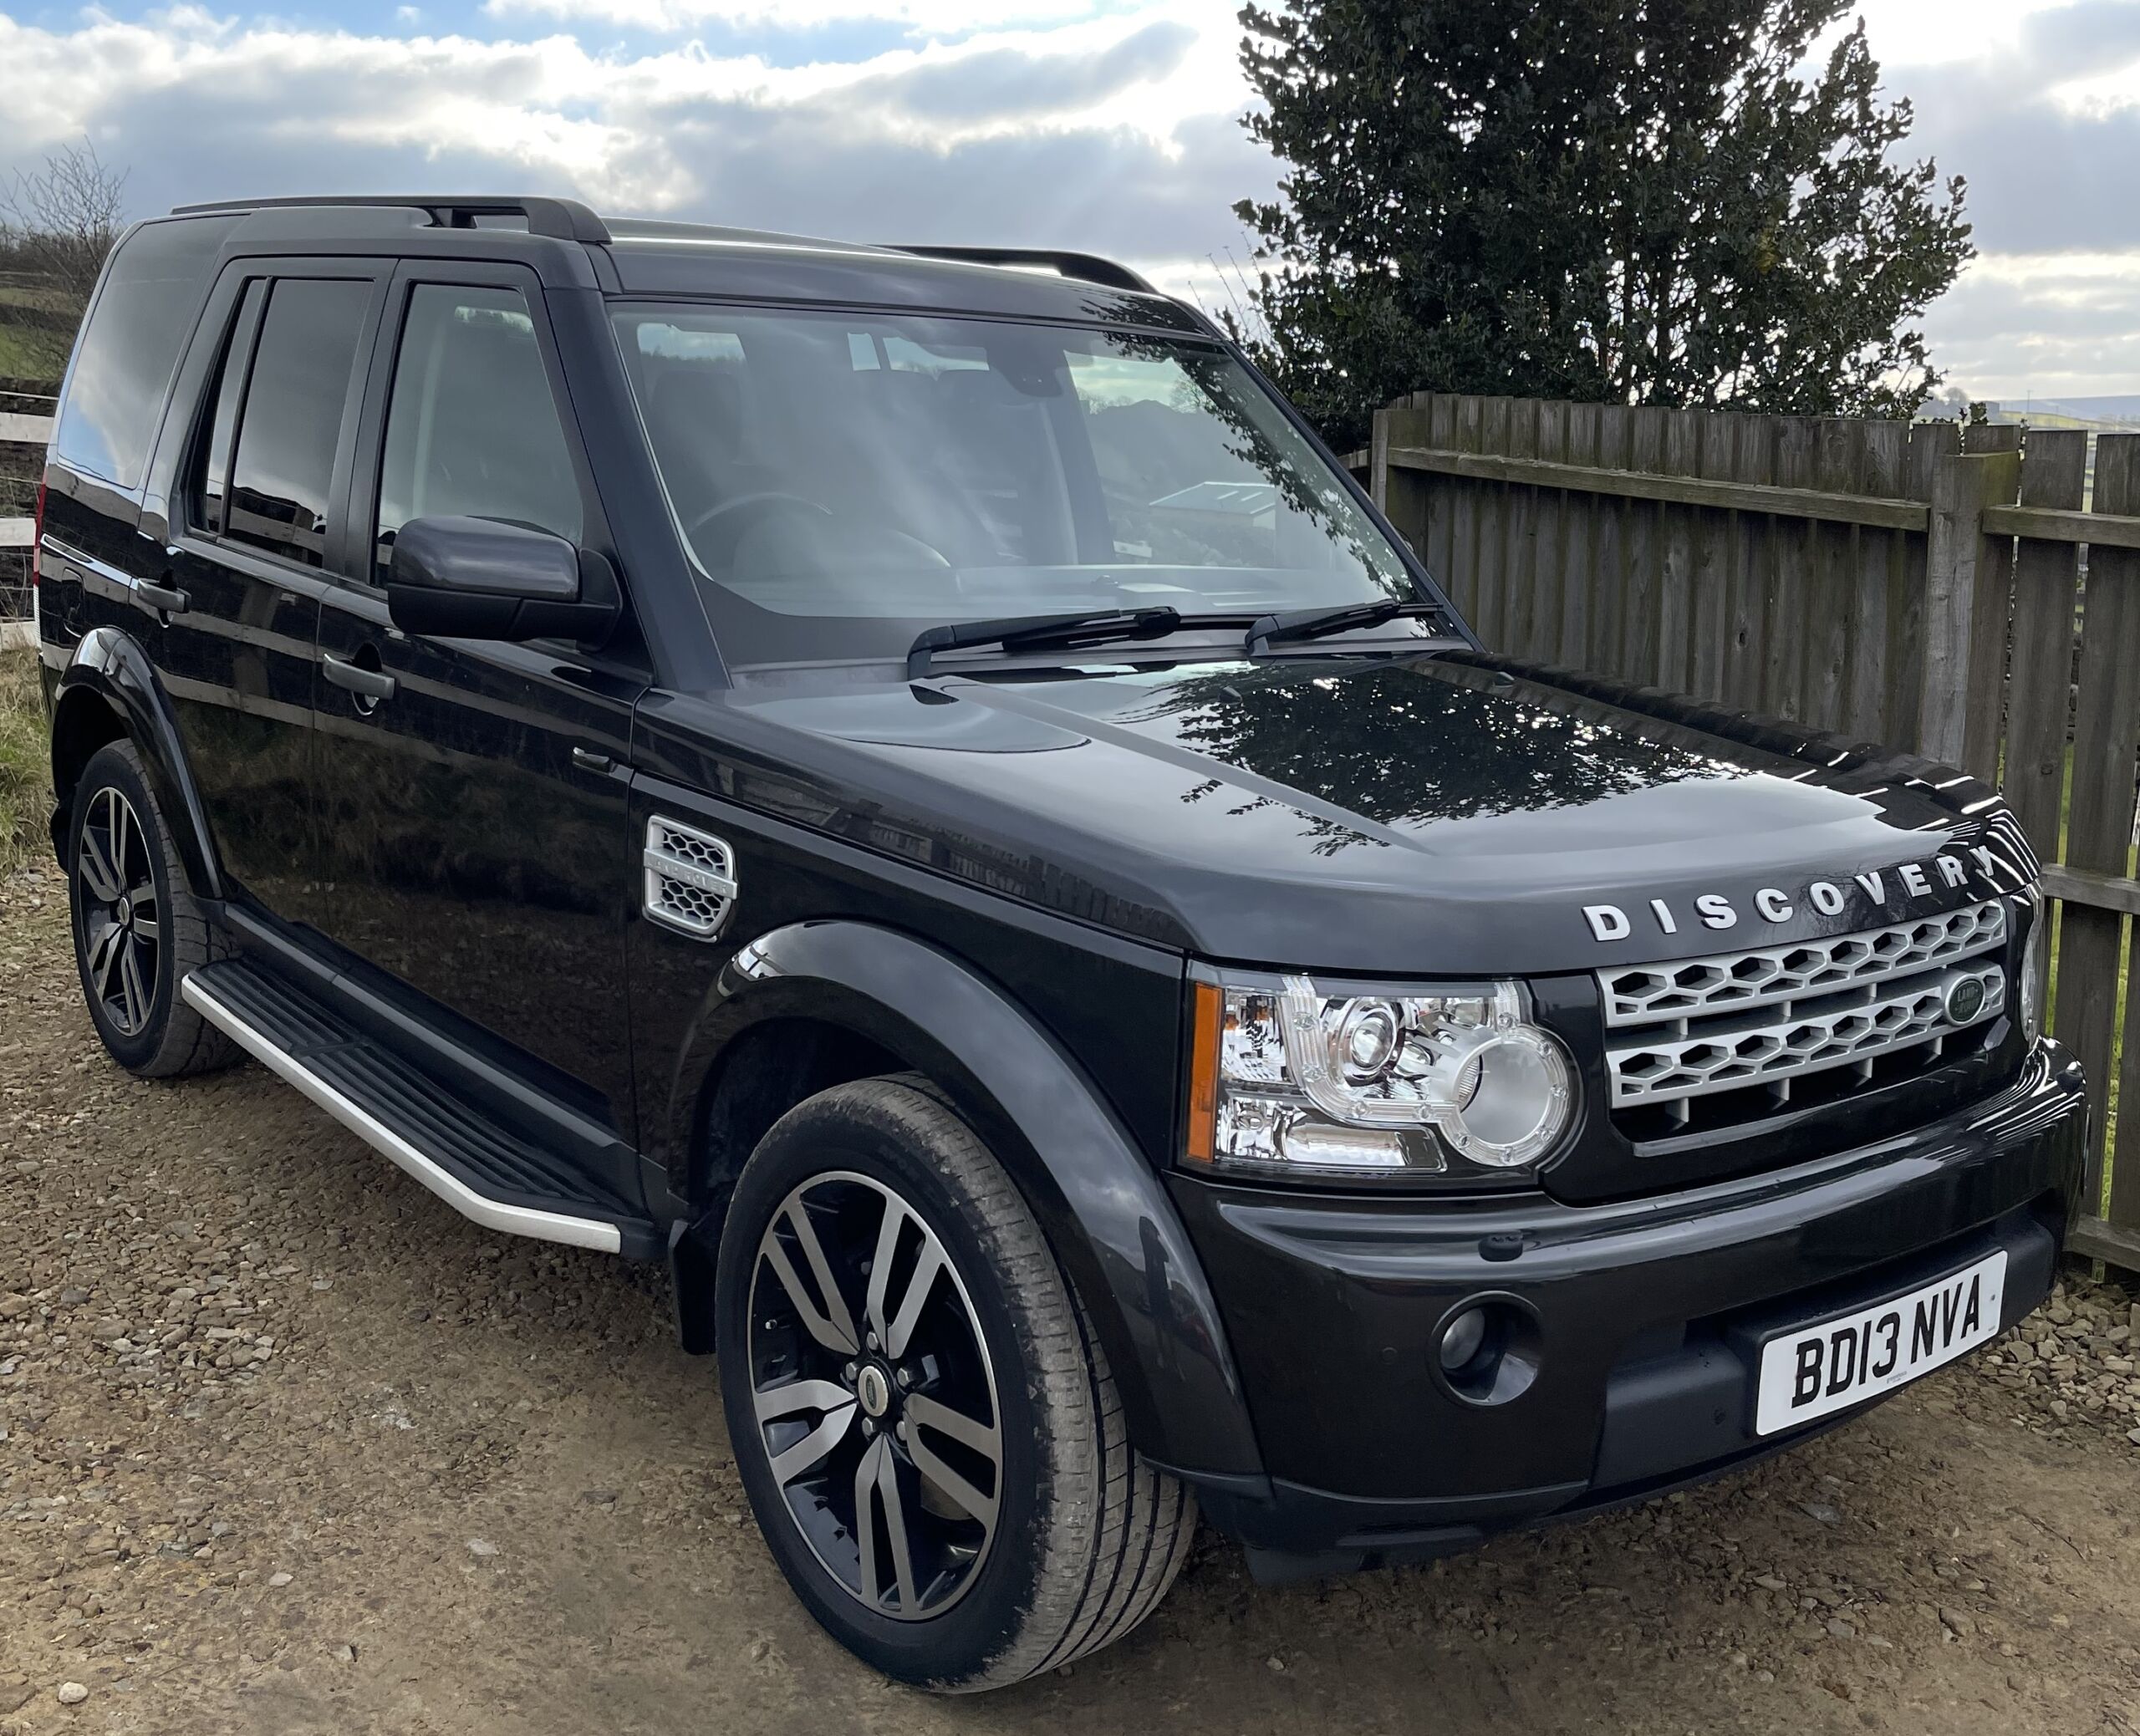 For Sale LAND ROVER DISCOVERY SDV6 HSE LUXURY in West Yorkshire